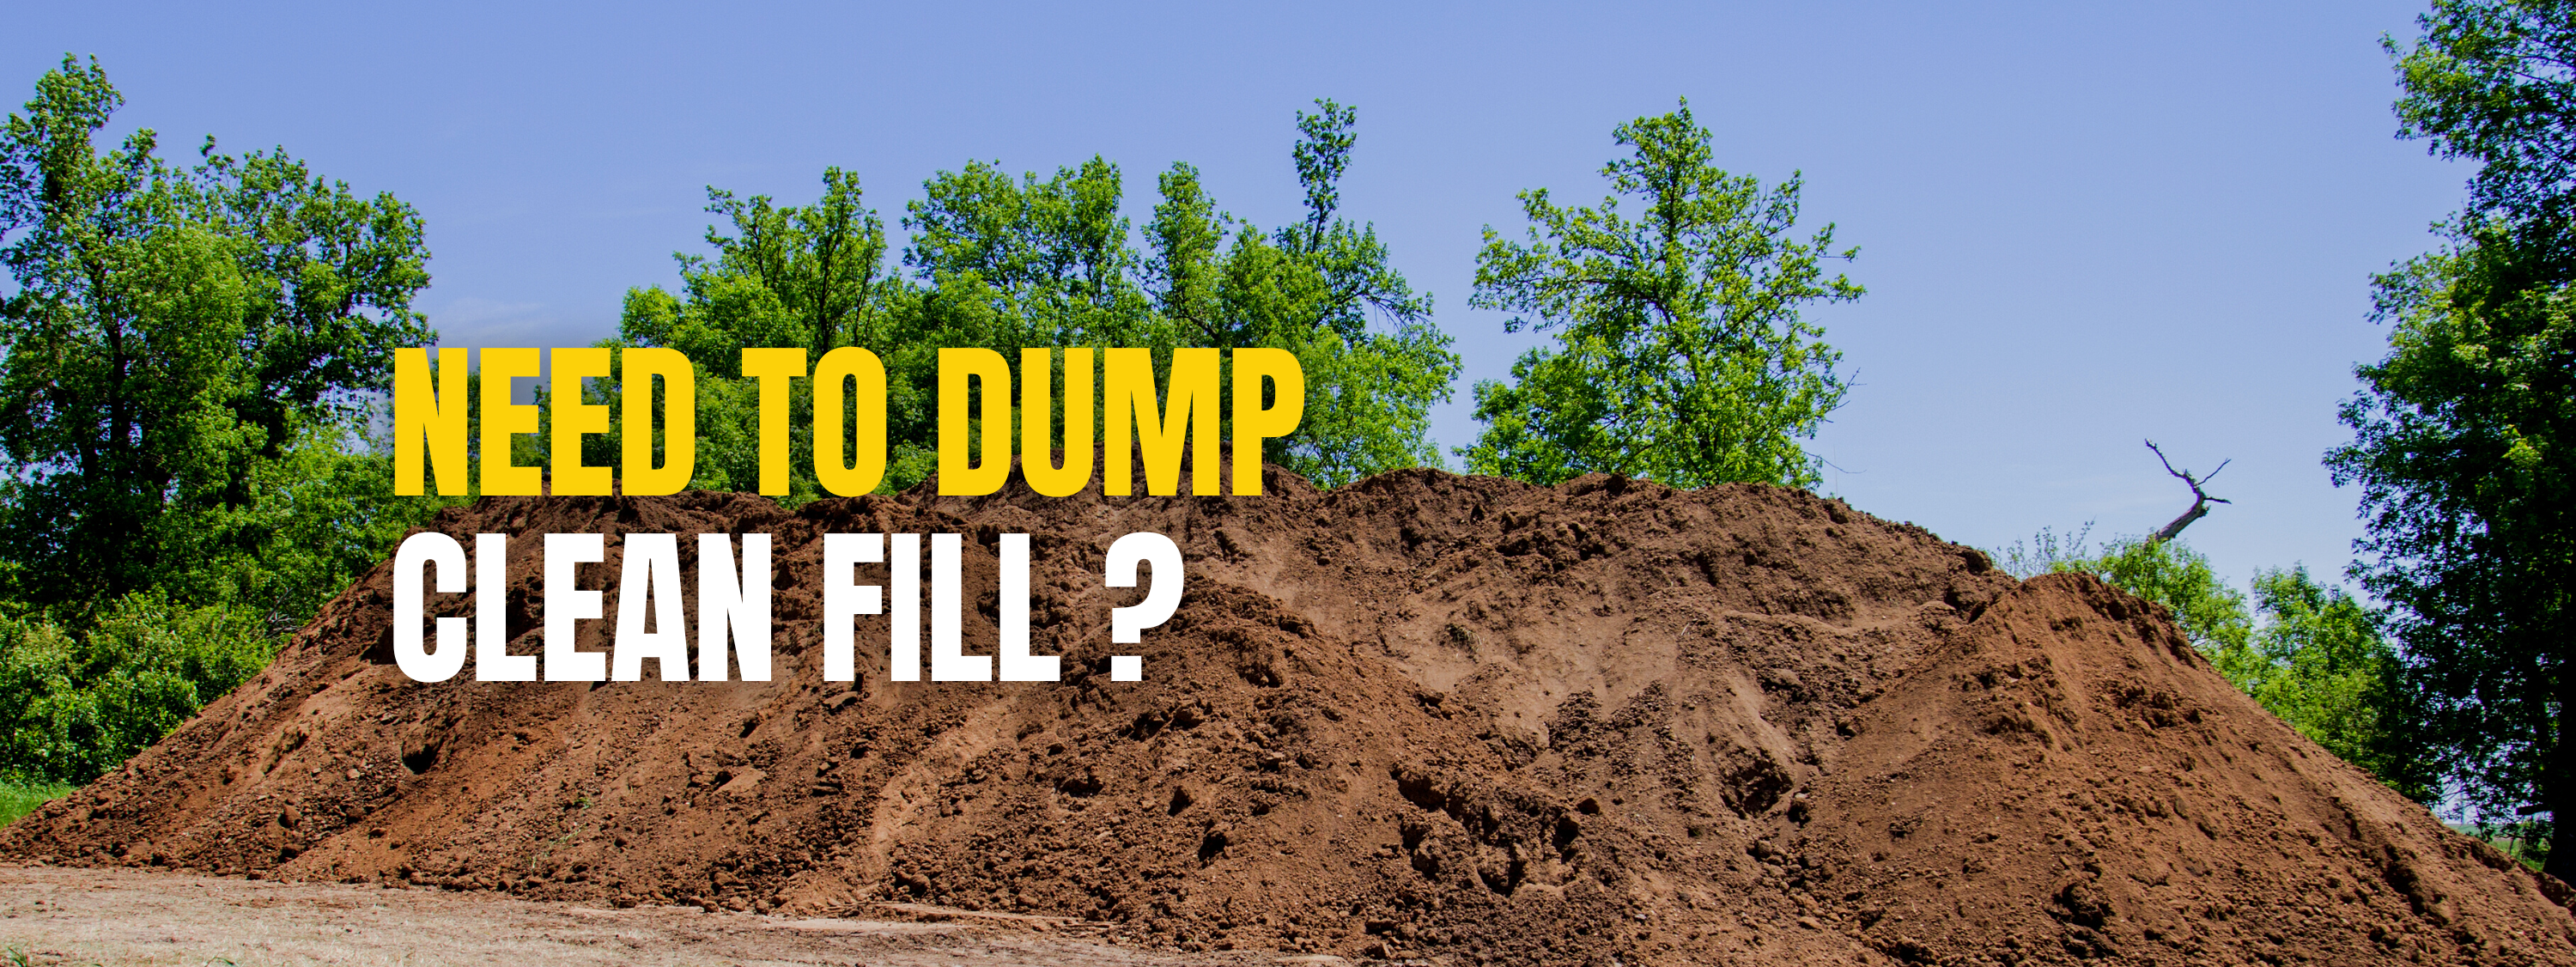 Need to dump clean fill?